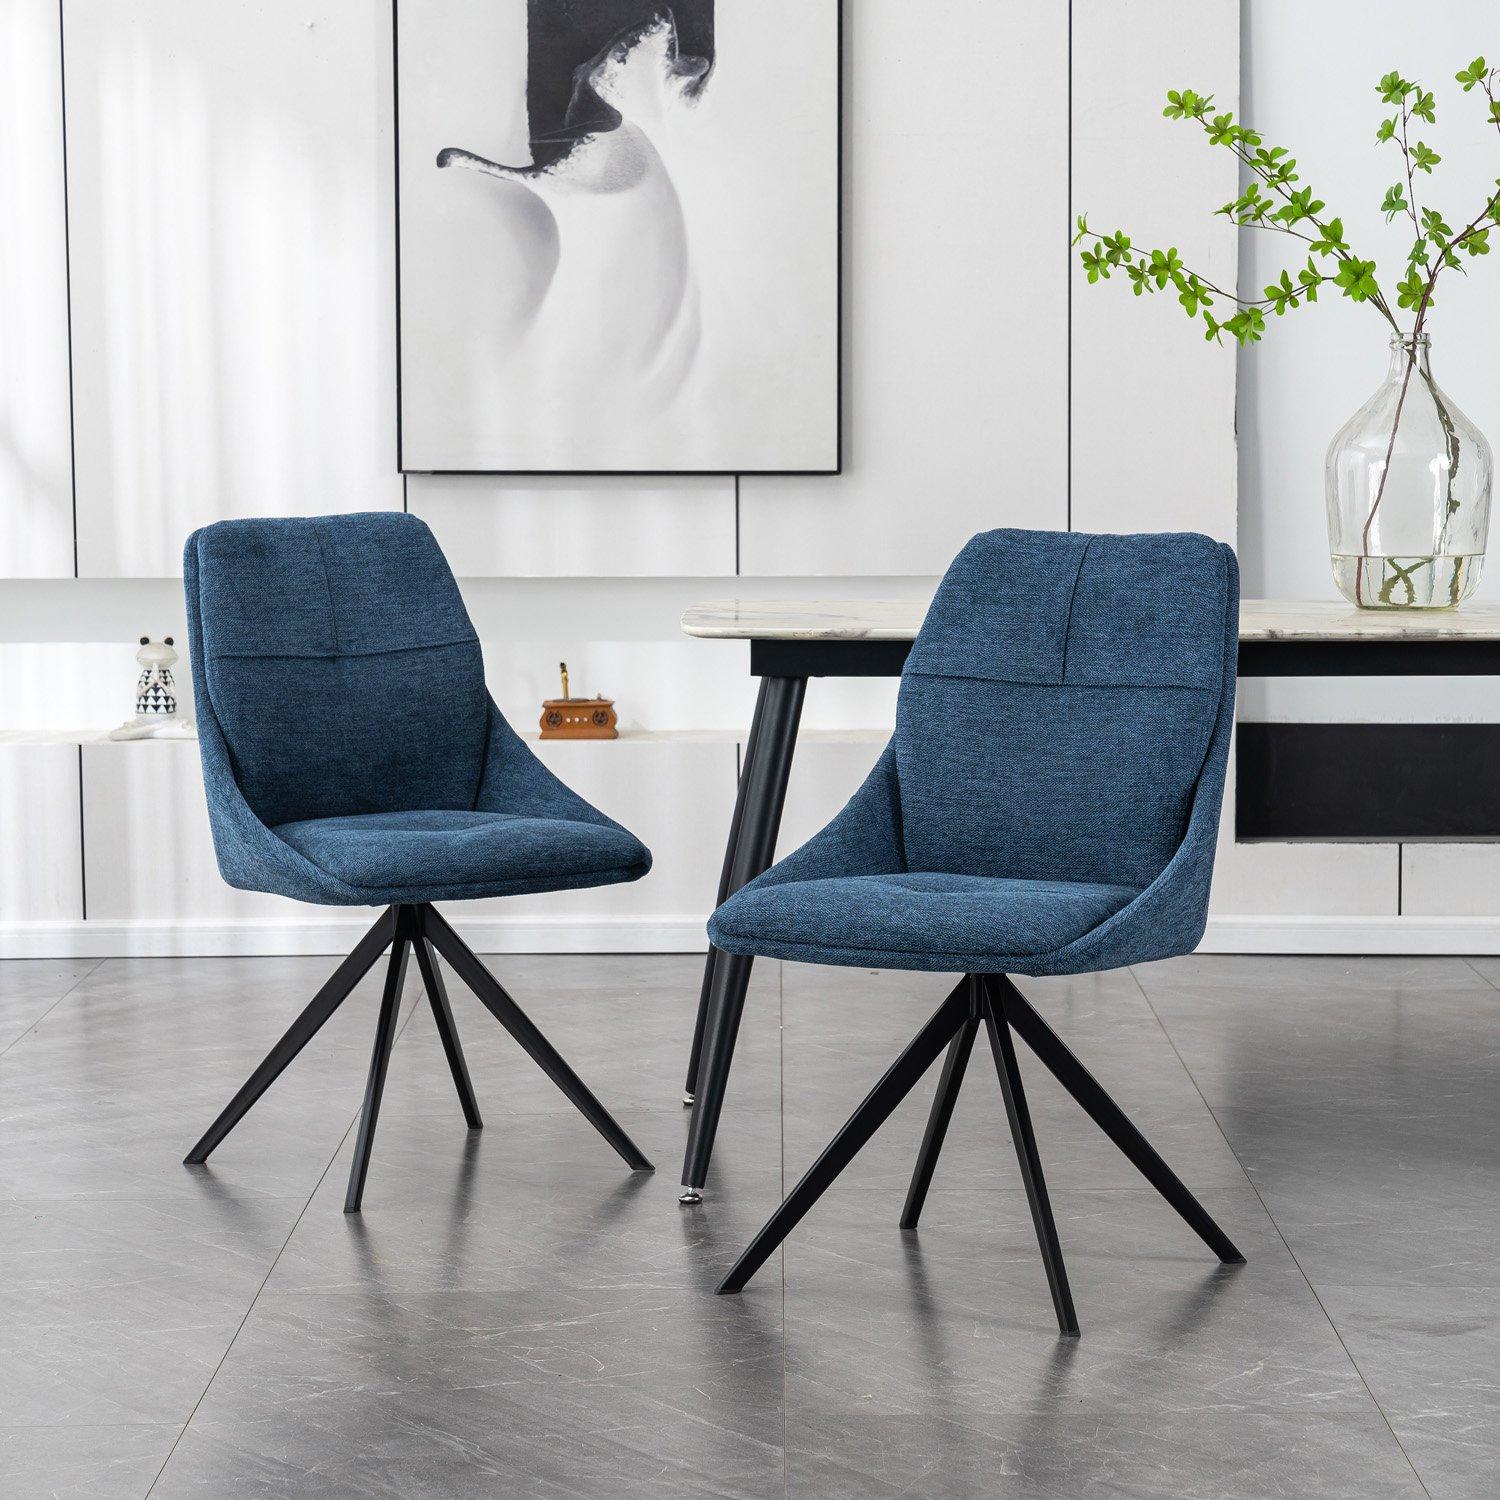 Set of 4 Luna Modern Fabric Dining Chair Padded Seat w Arms Metal Legs